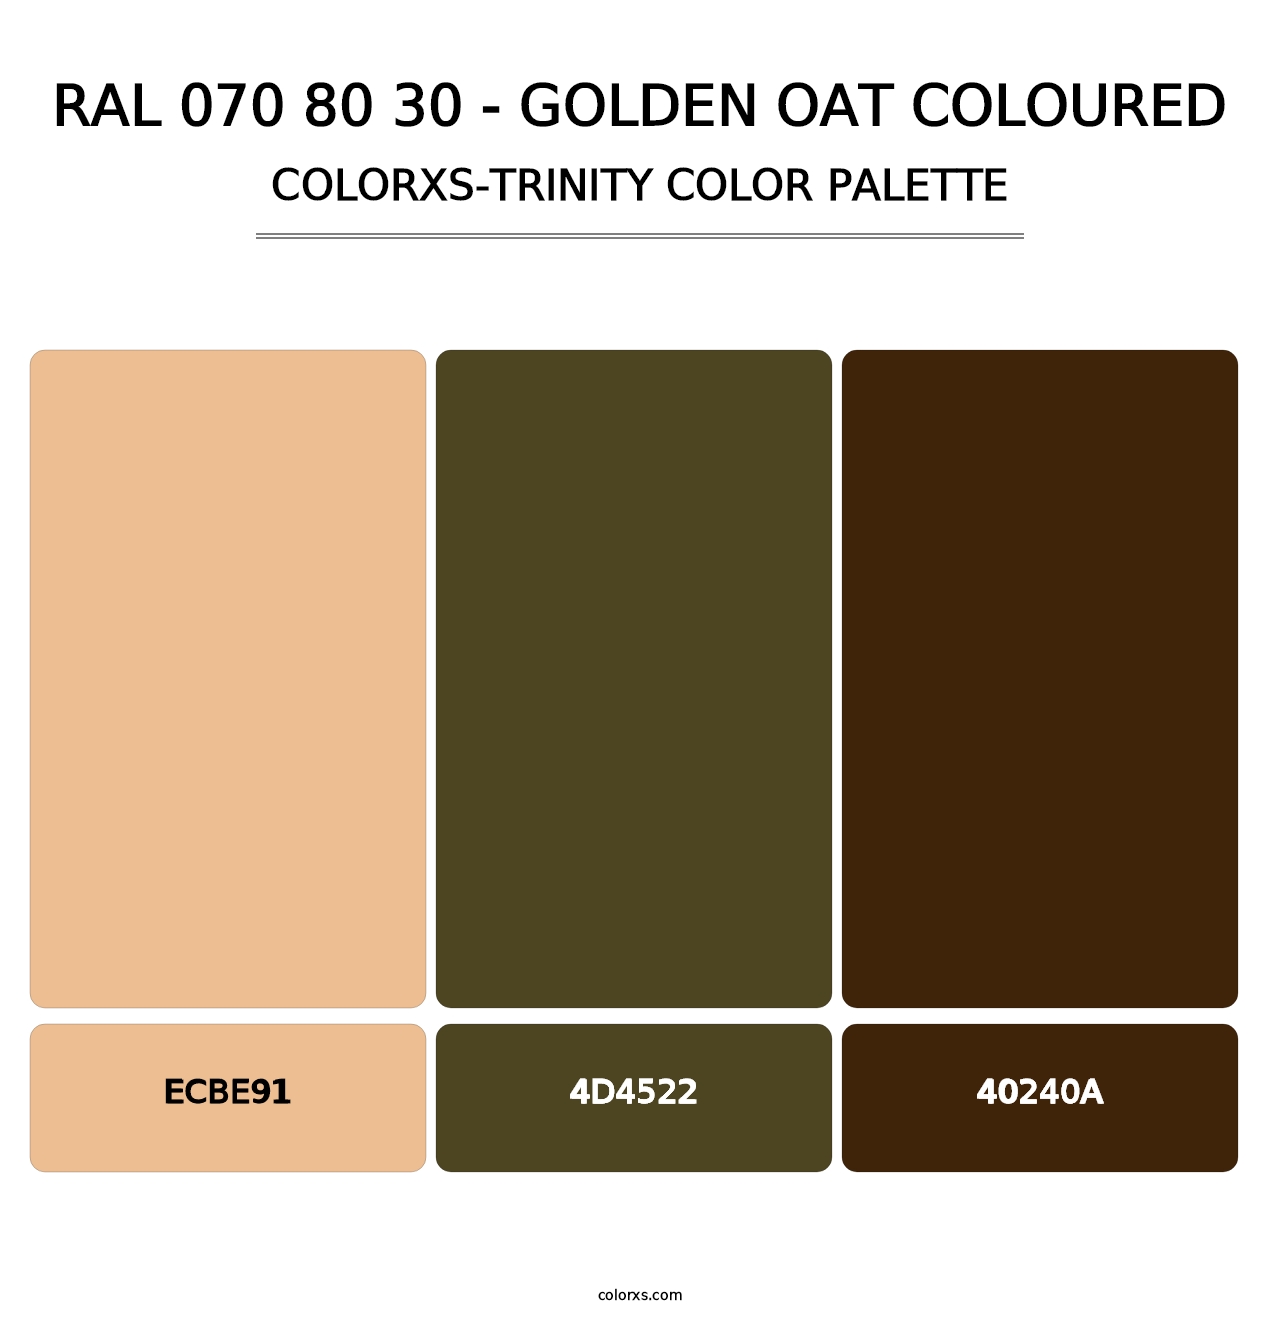 RAL 070 80 30 - Golden Oat Coloured - Colorxs Trinity Palette